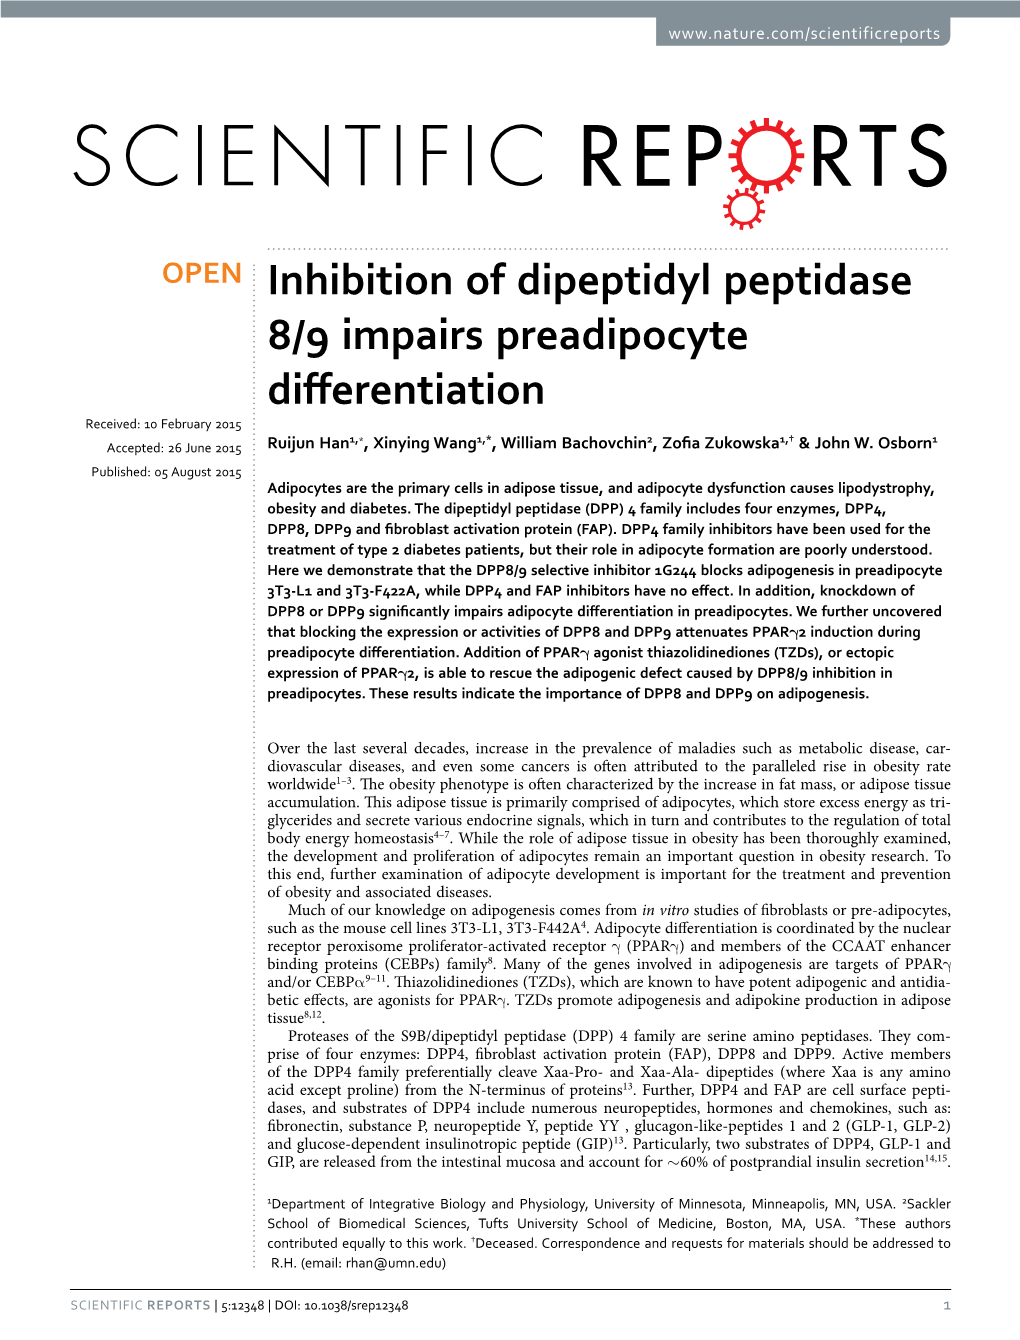 Inhibition of Dipeptidyl Peptidase 8/9 Impairs Preadipocyte Differentiation